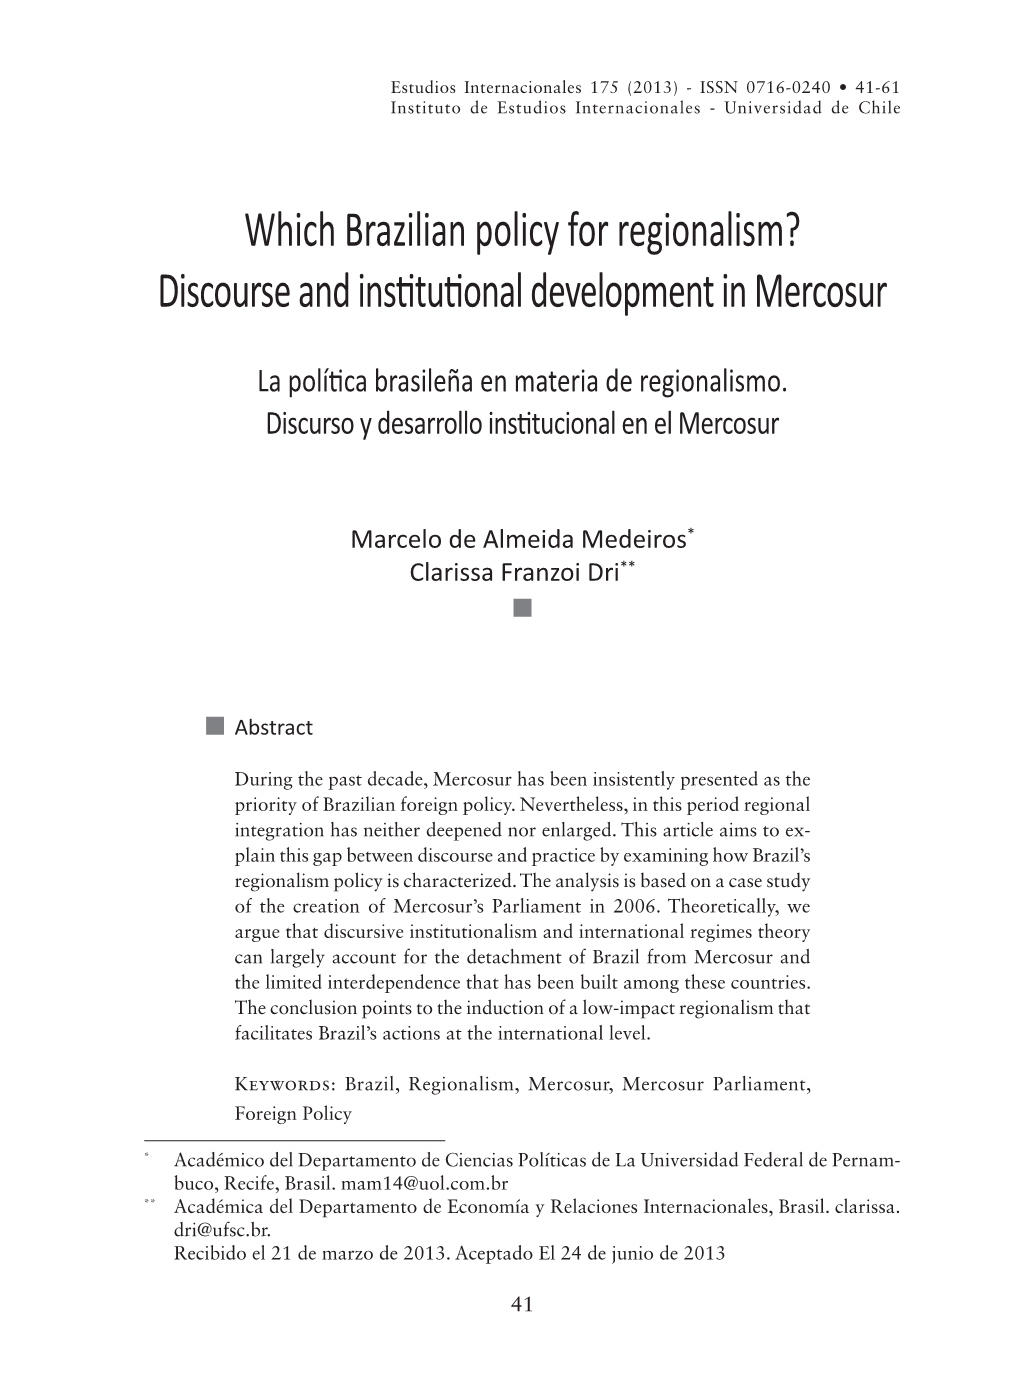 Which Brazilian Policy for Regionalism? Discourse and Institutional Development in Mercosur